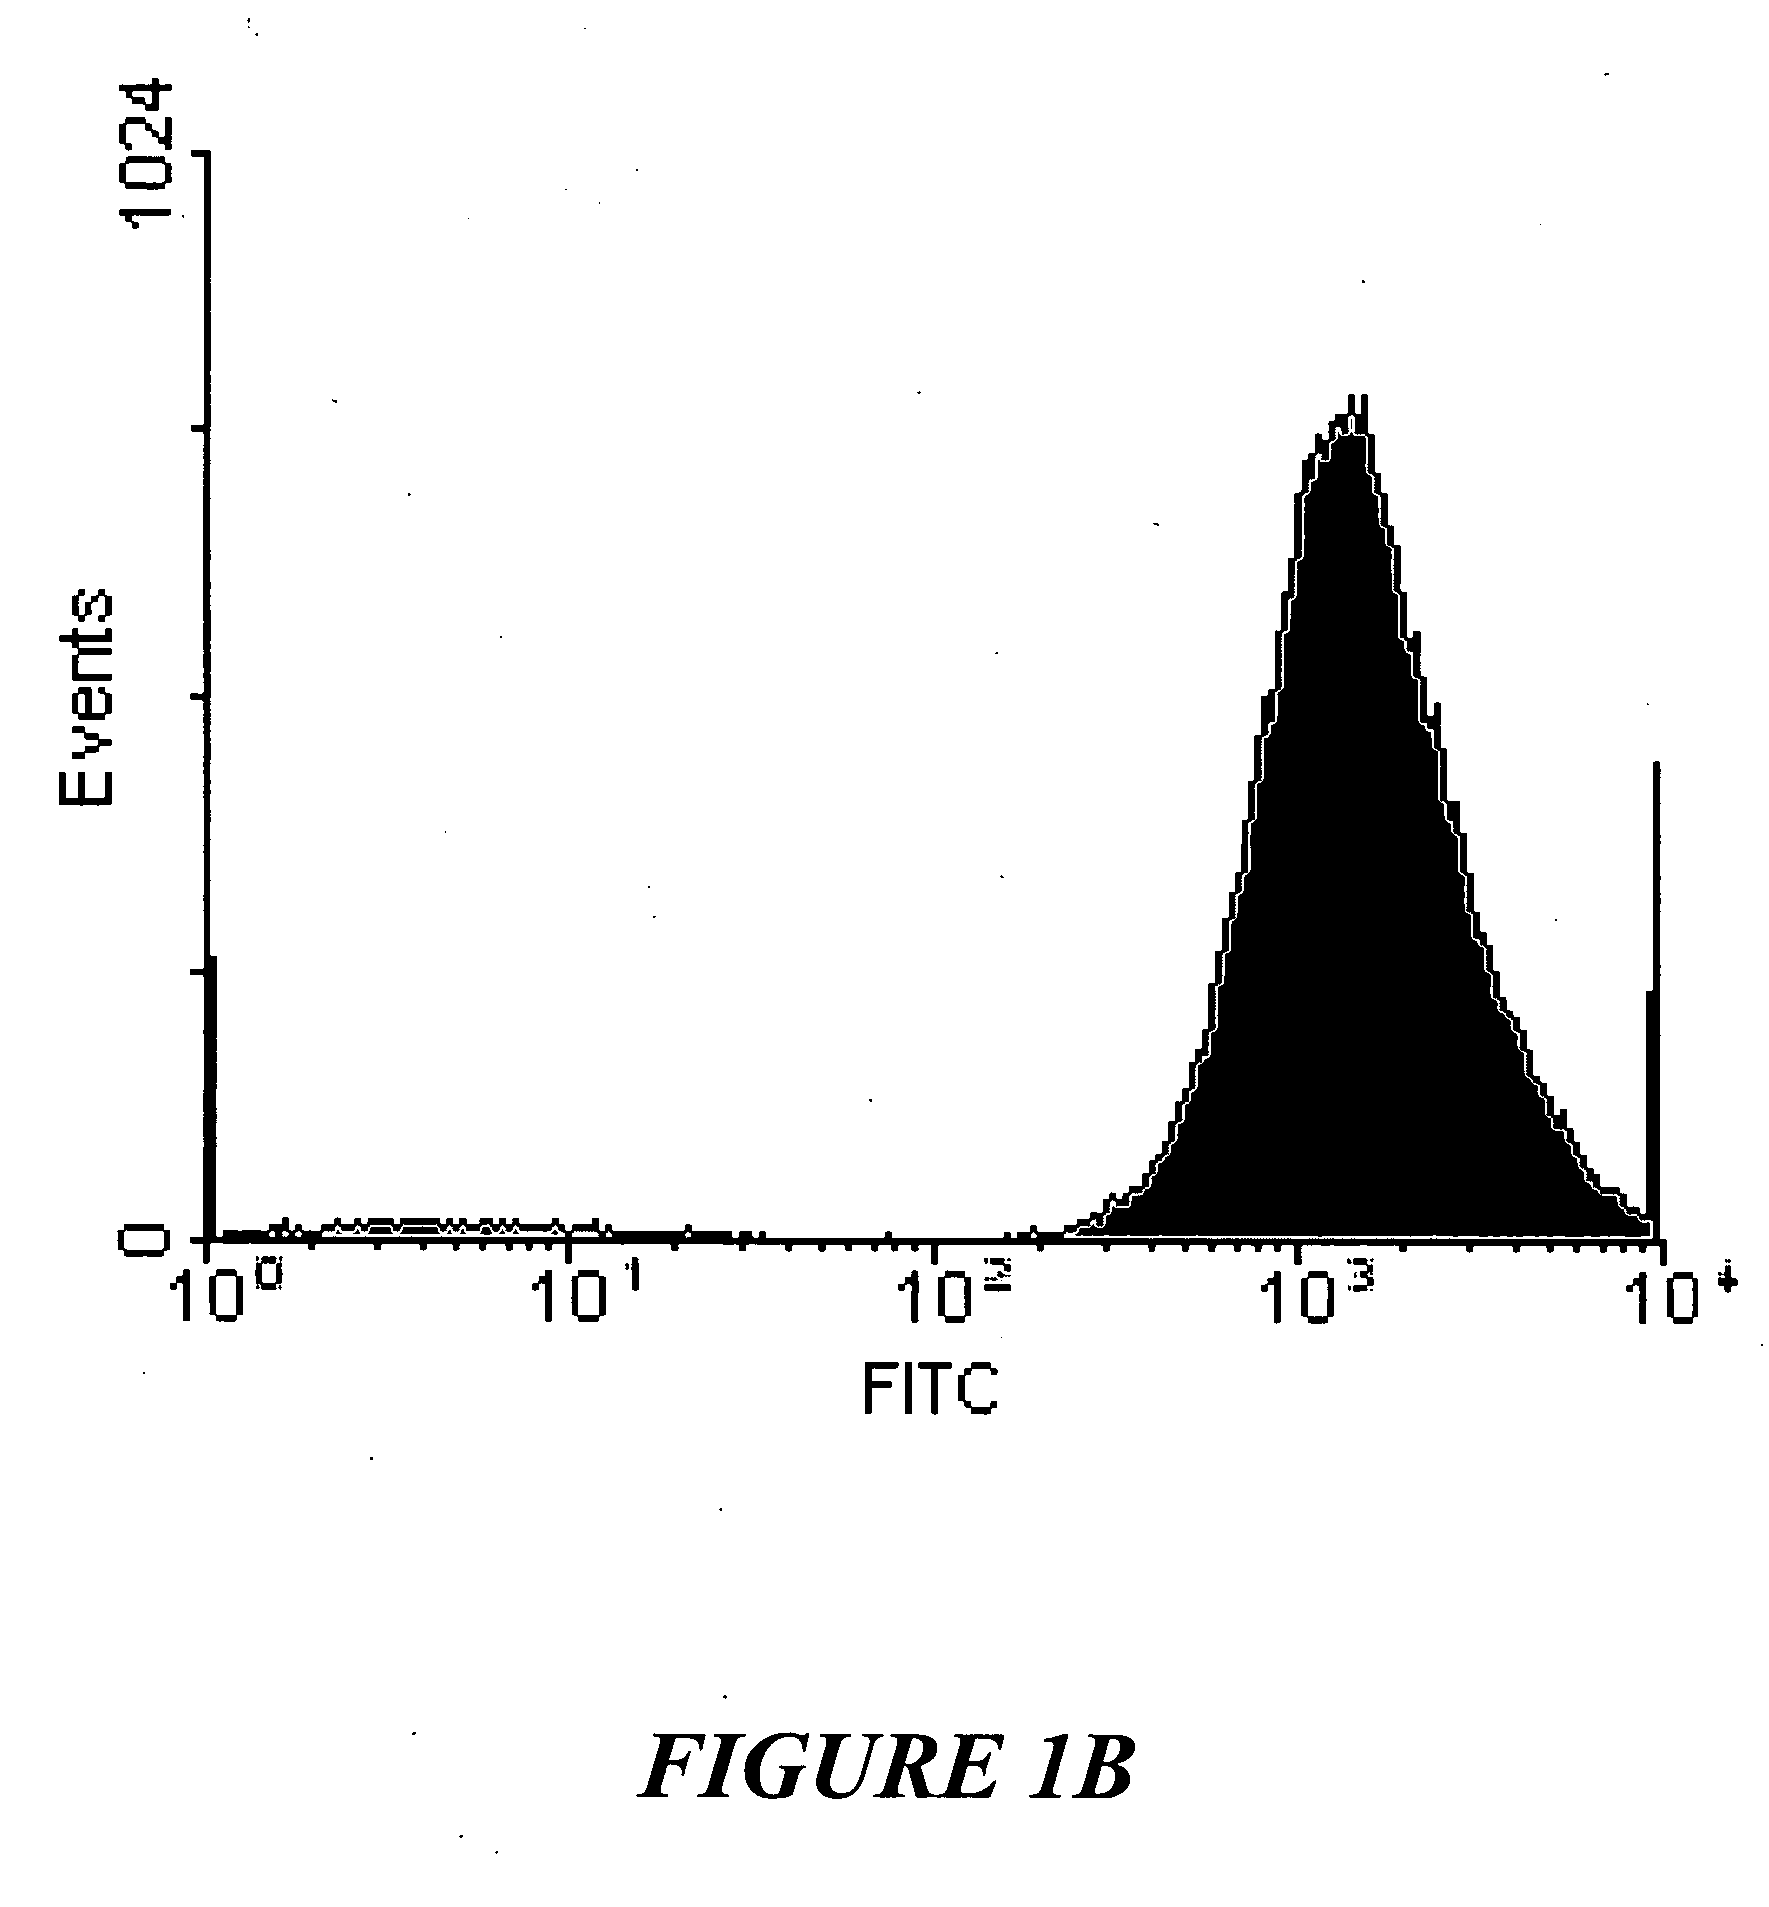 Method of cryopreserving cells and tissues by liposomal delivery of sugars to enhance post-thaw viability